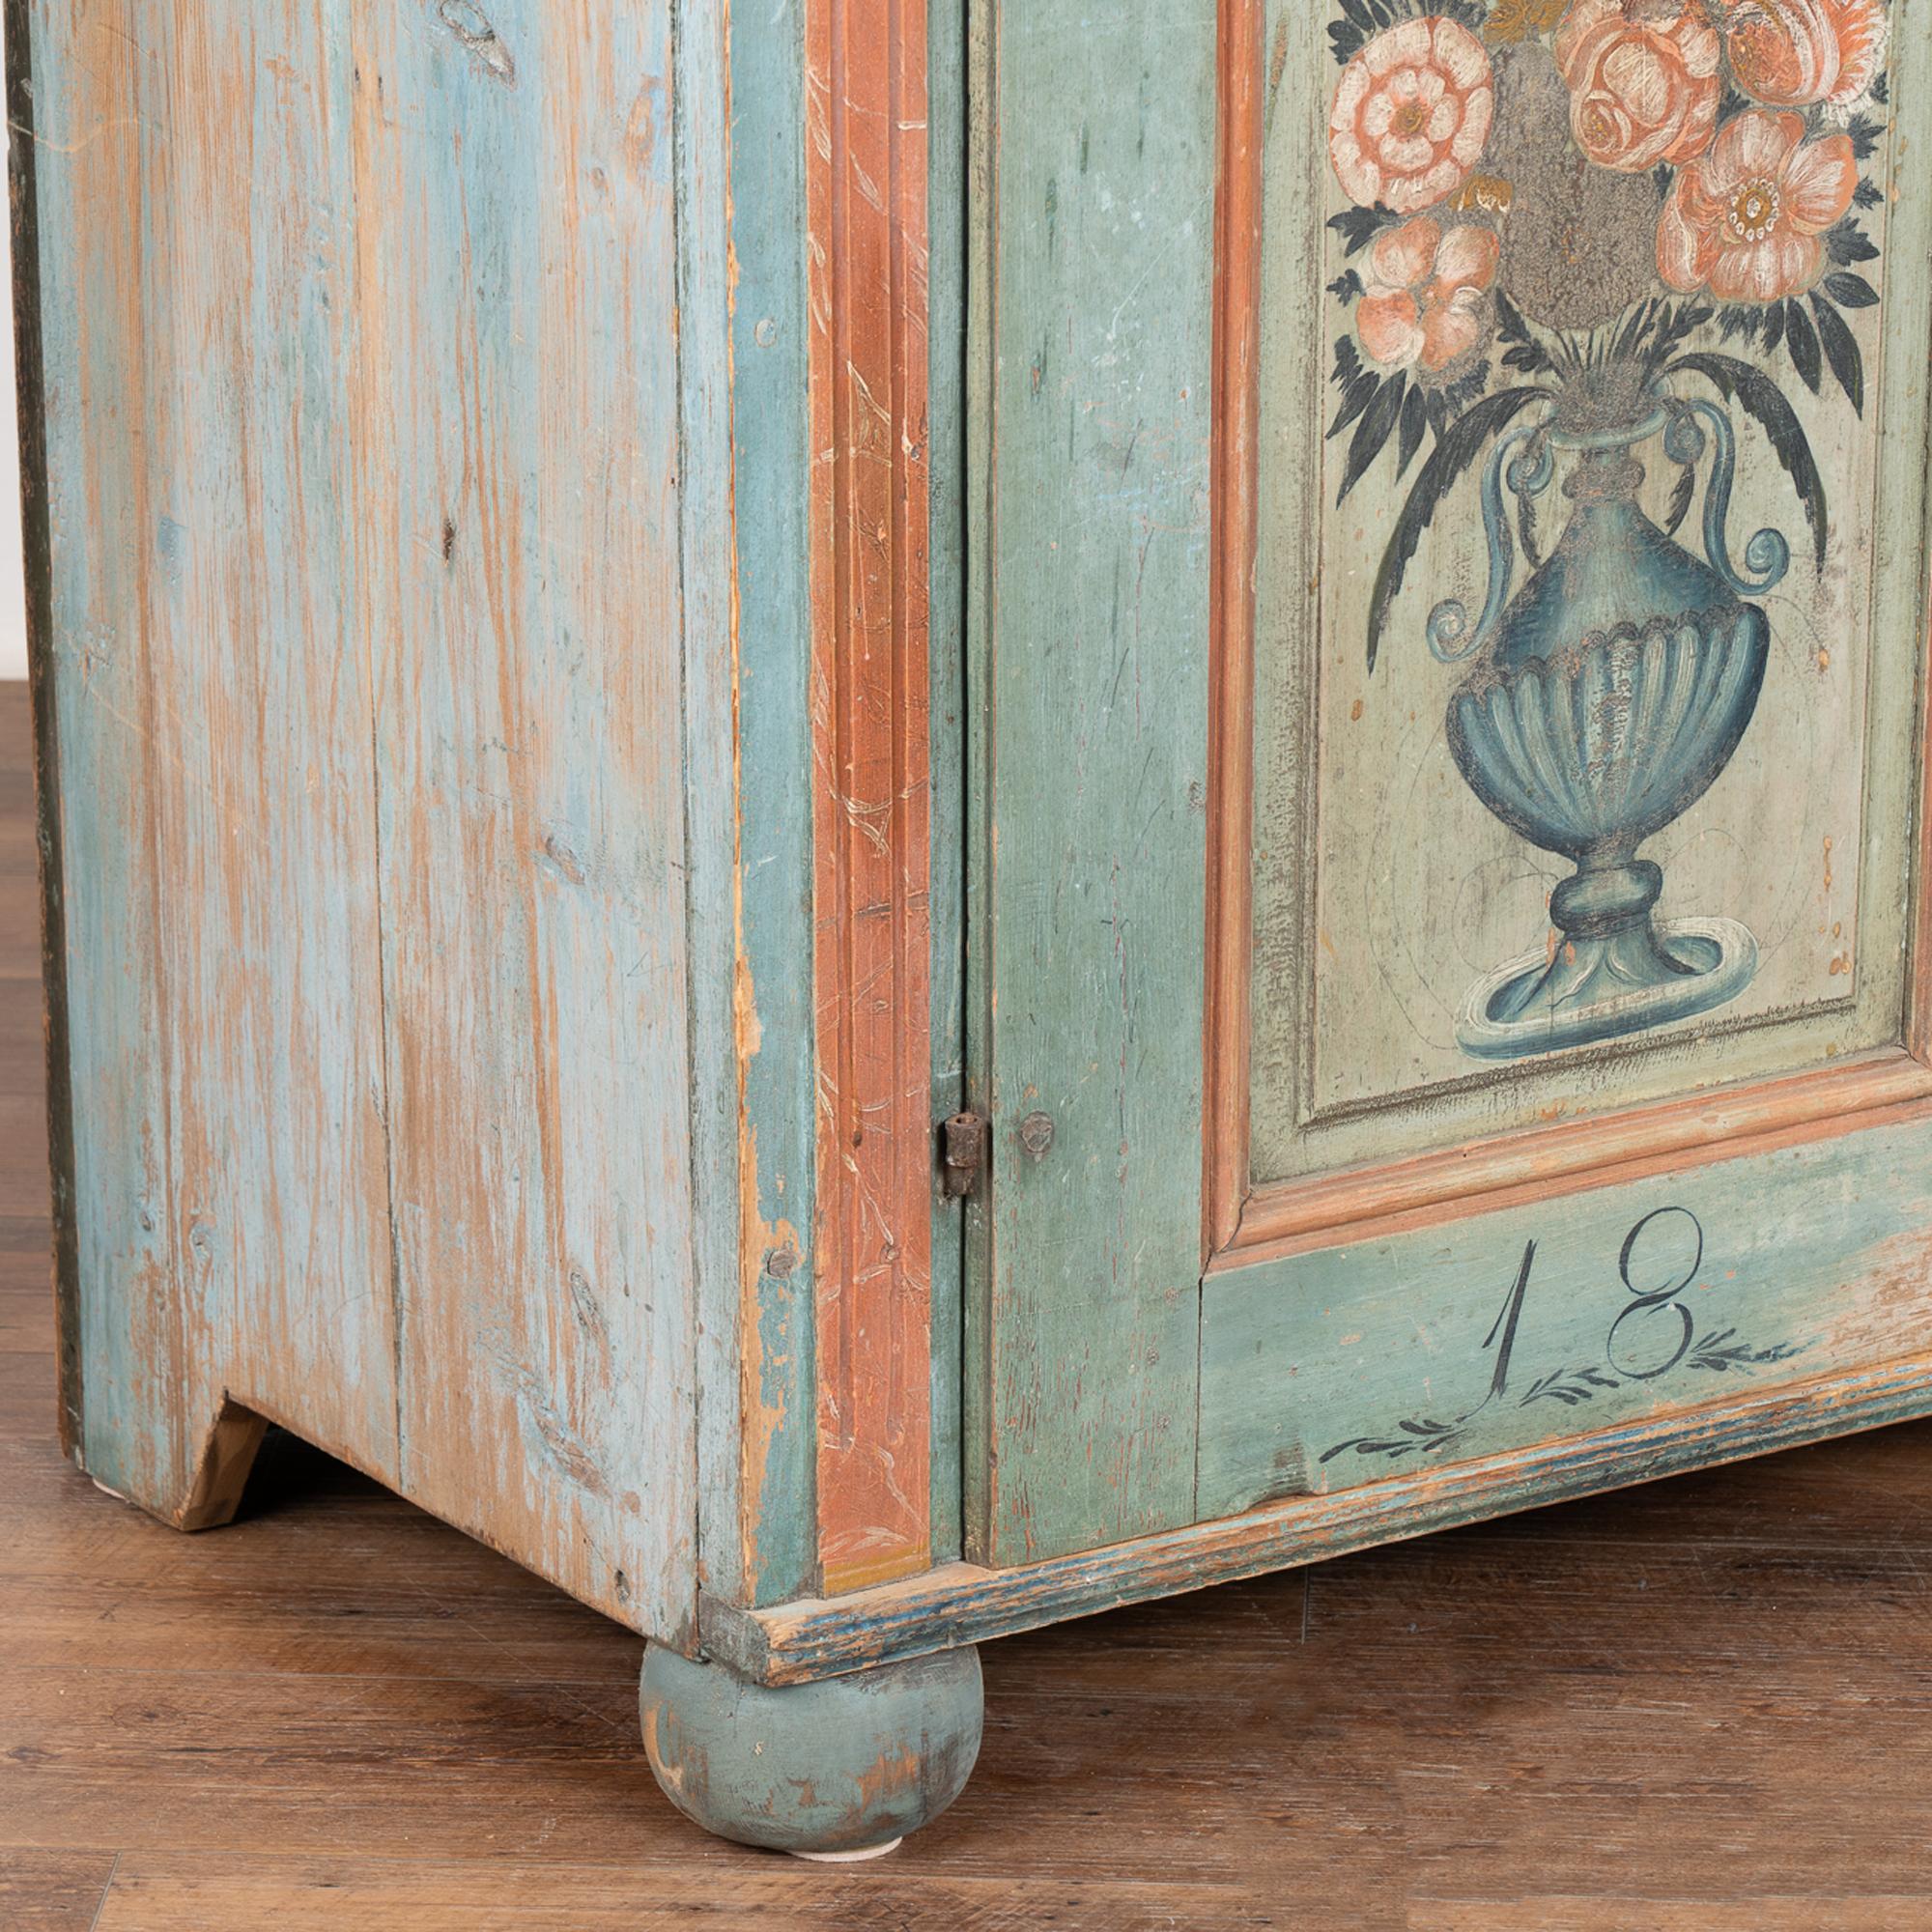 Original Blue Painted Sideboard Cabinet, Sweden dated 1843 In Good Condition For Sale In Round Top, TX